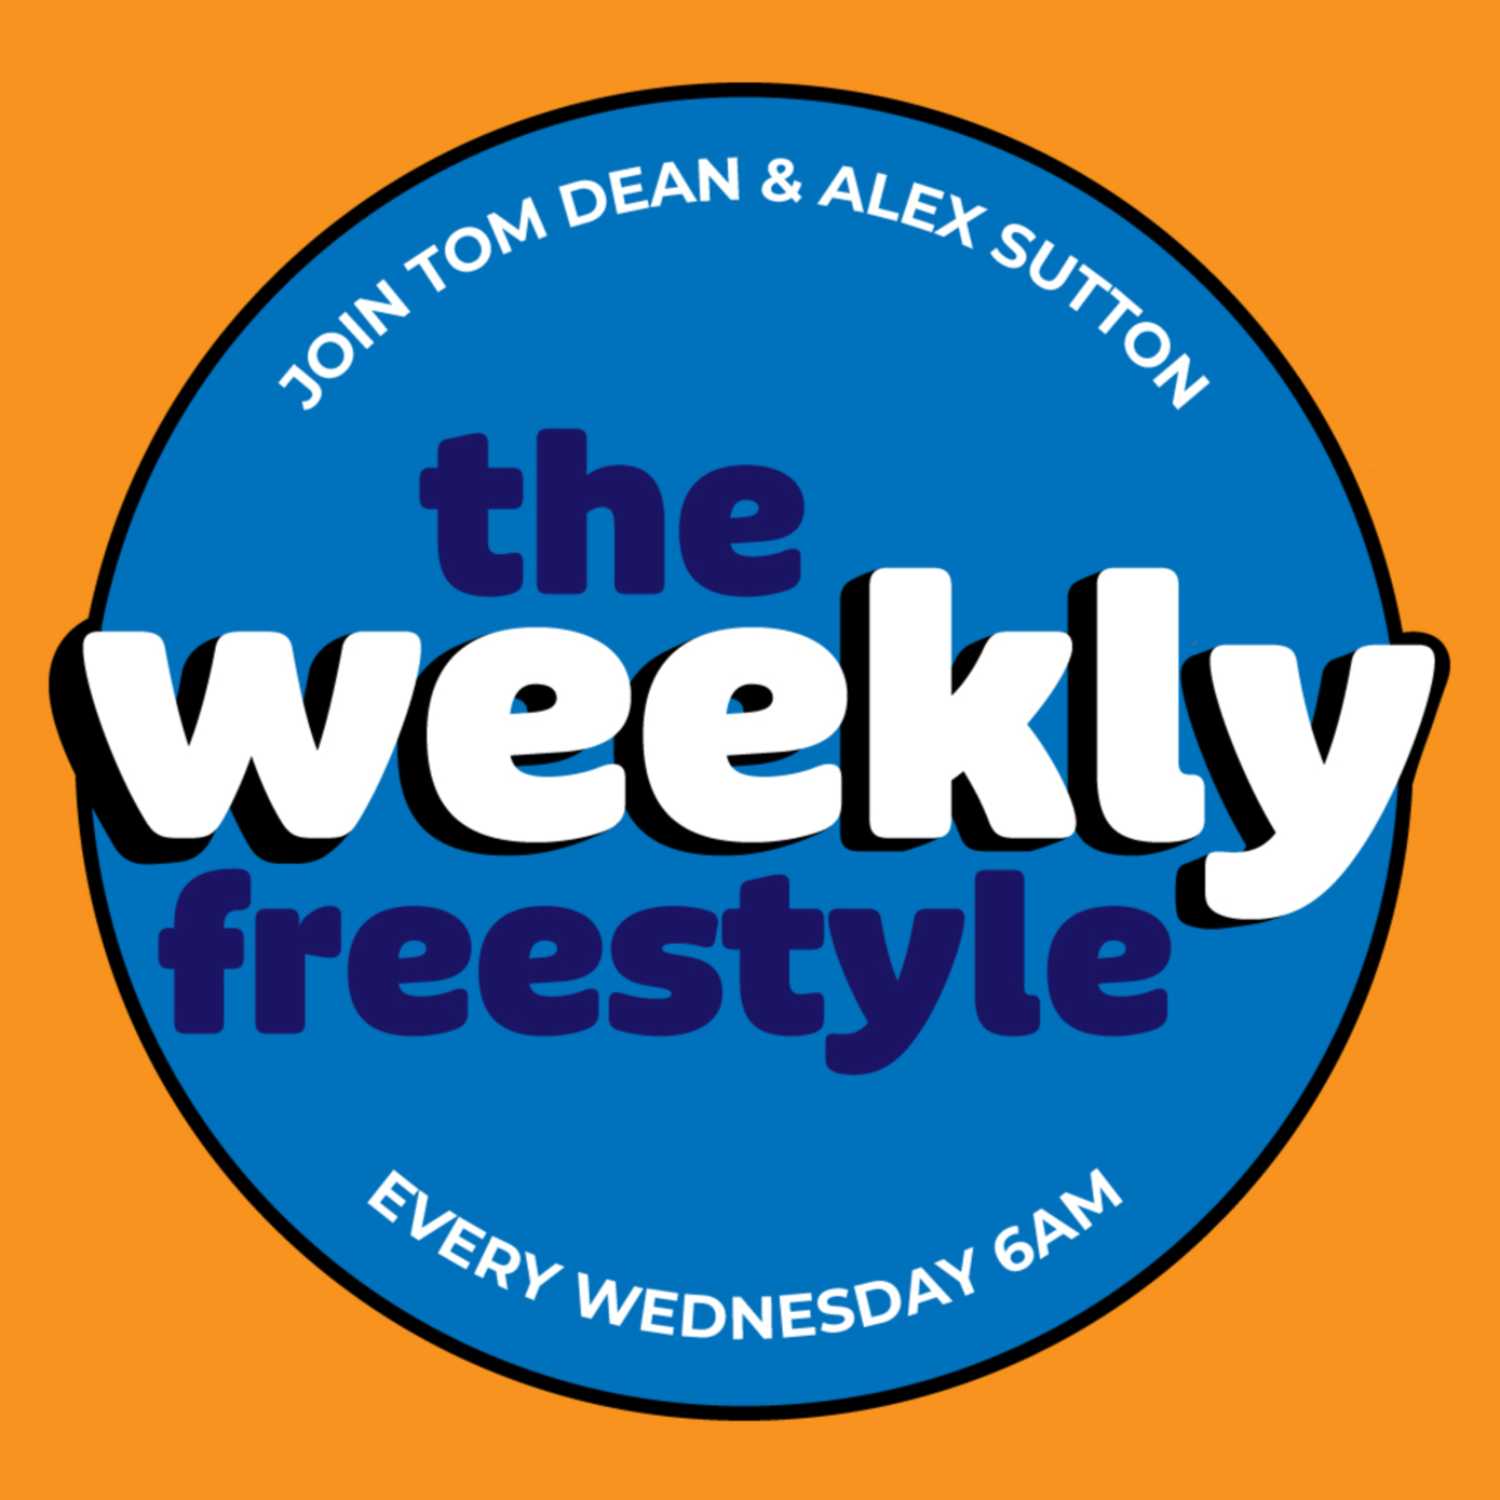 The Weekly Freestyle